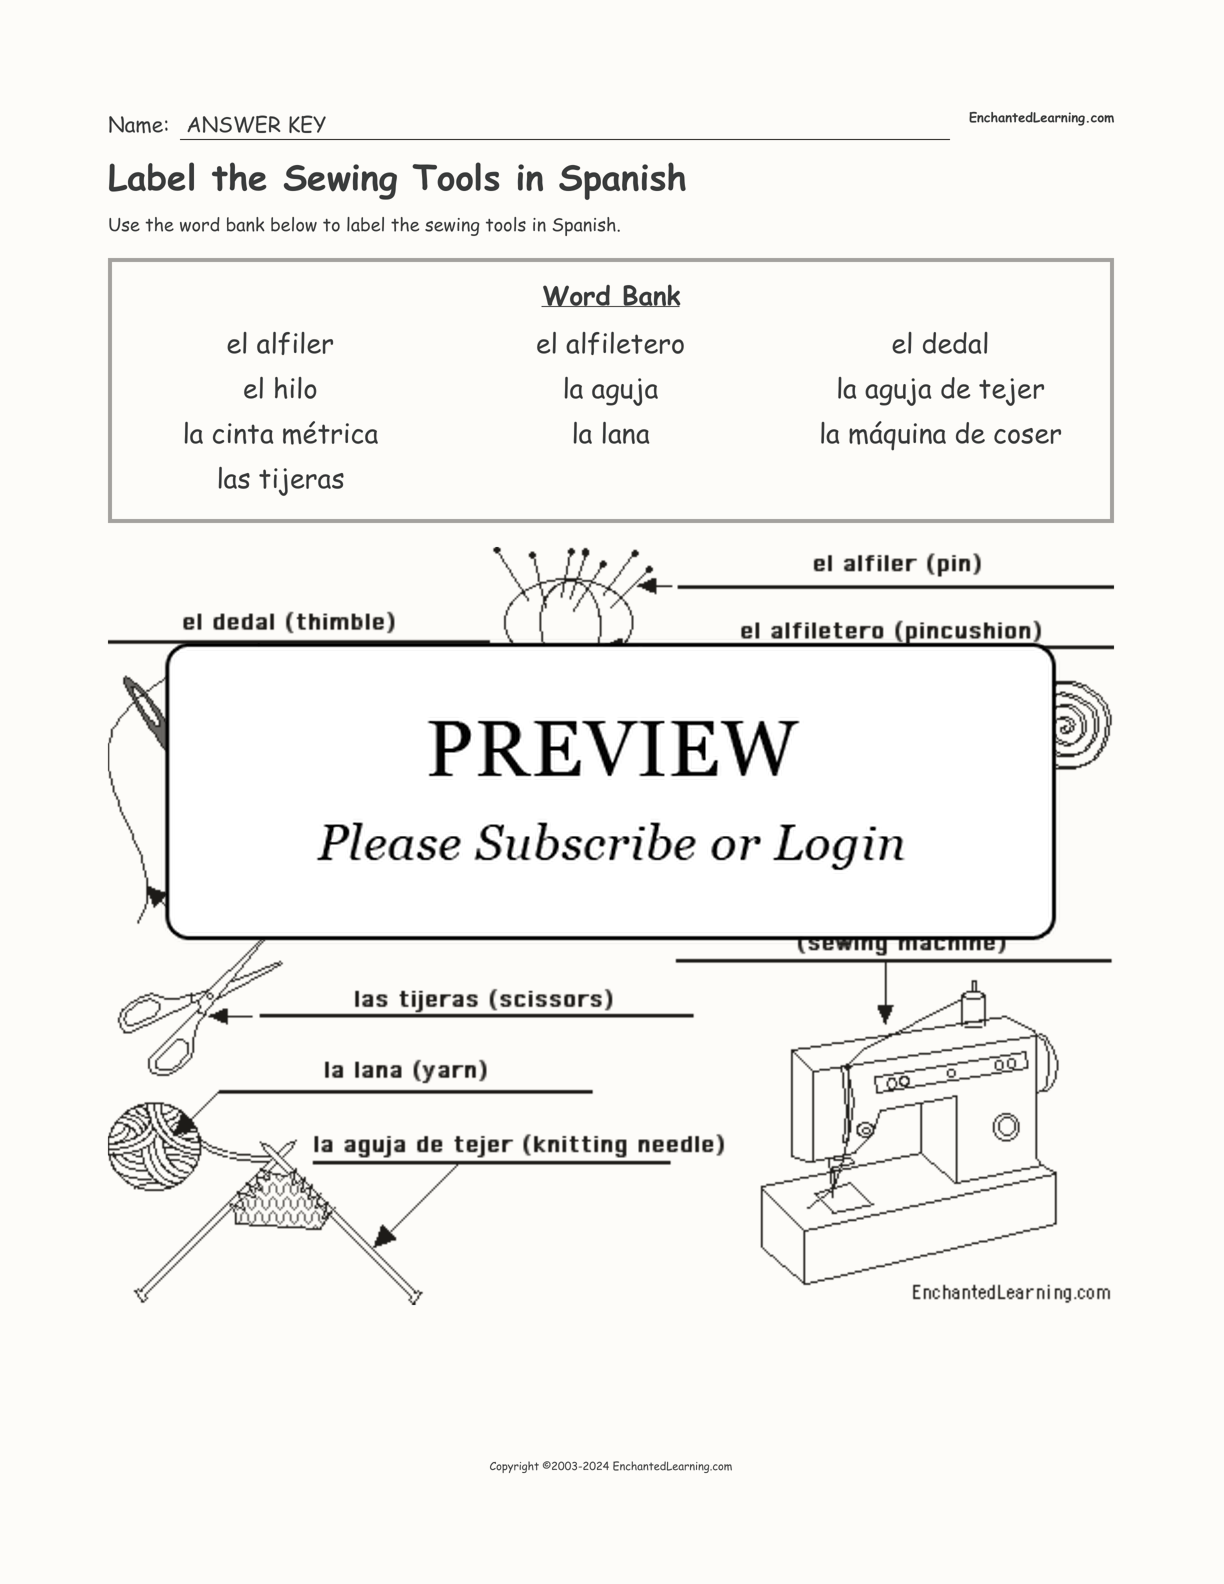 Label the Sewing Tools in Spanish interactive worksheet page 2